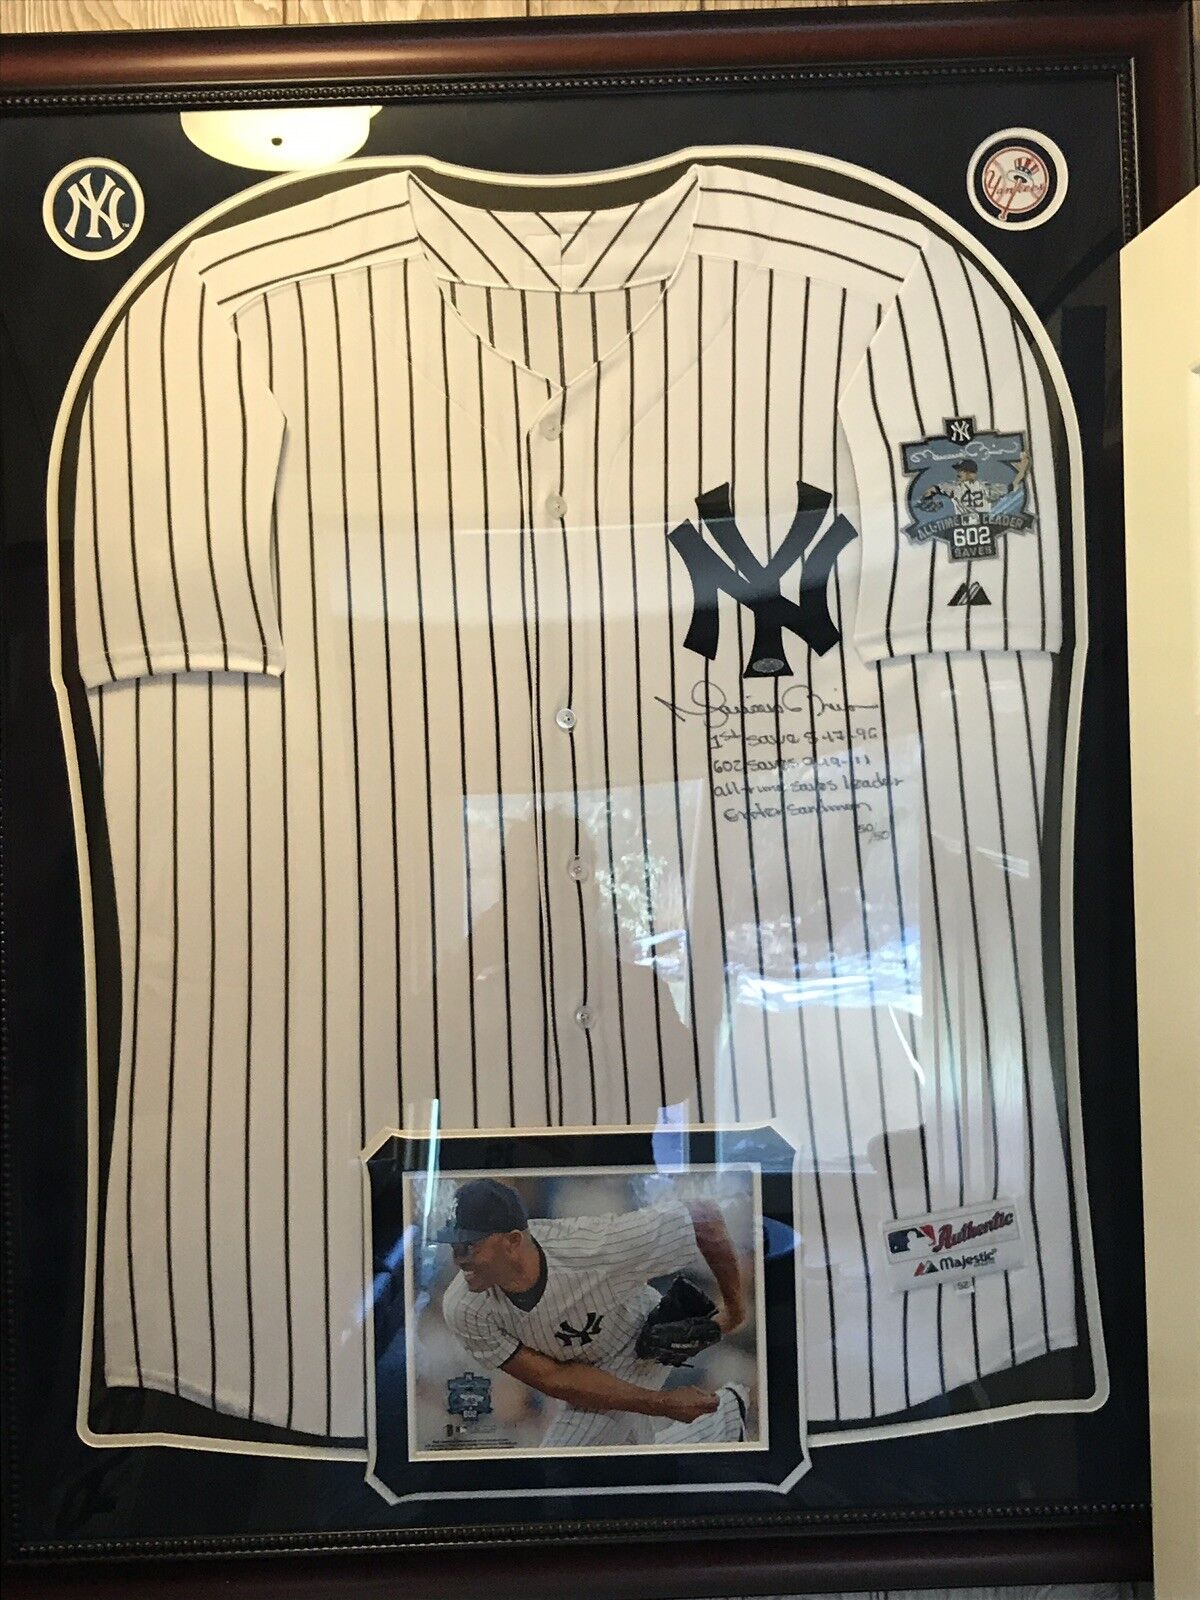 Mariano Rivera Signed Jersey LE 50 HOF 19 UNANIMOUS NYY Autograph STATS Steiner